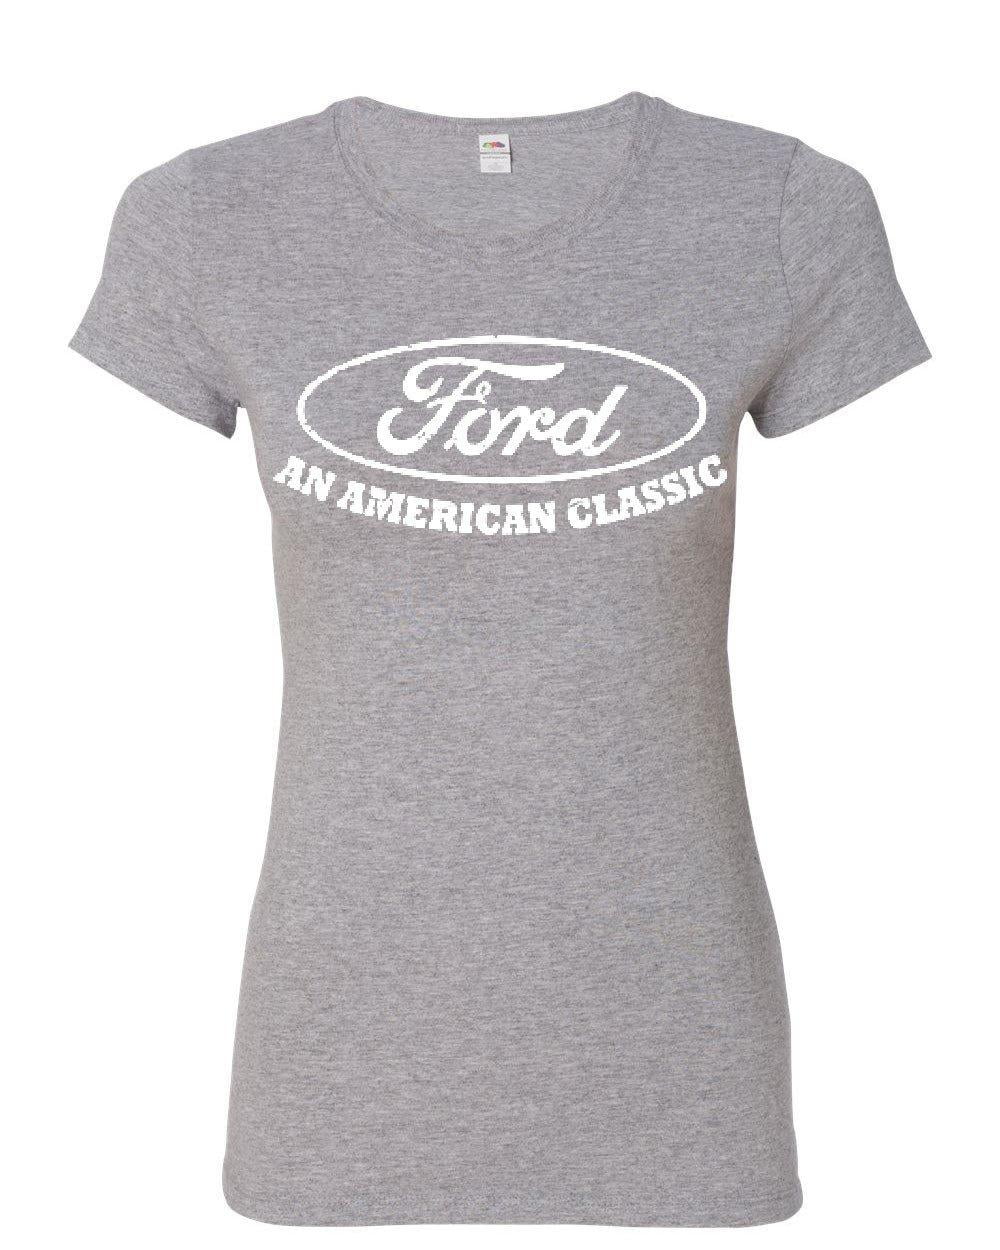 Tee Hunt Ford an American Classic Cotton T-Shirt Ford Truck Licensed ...